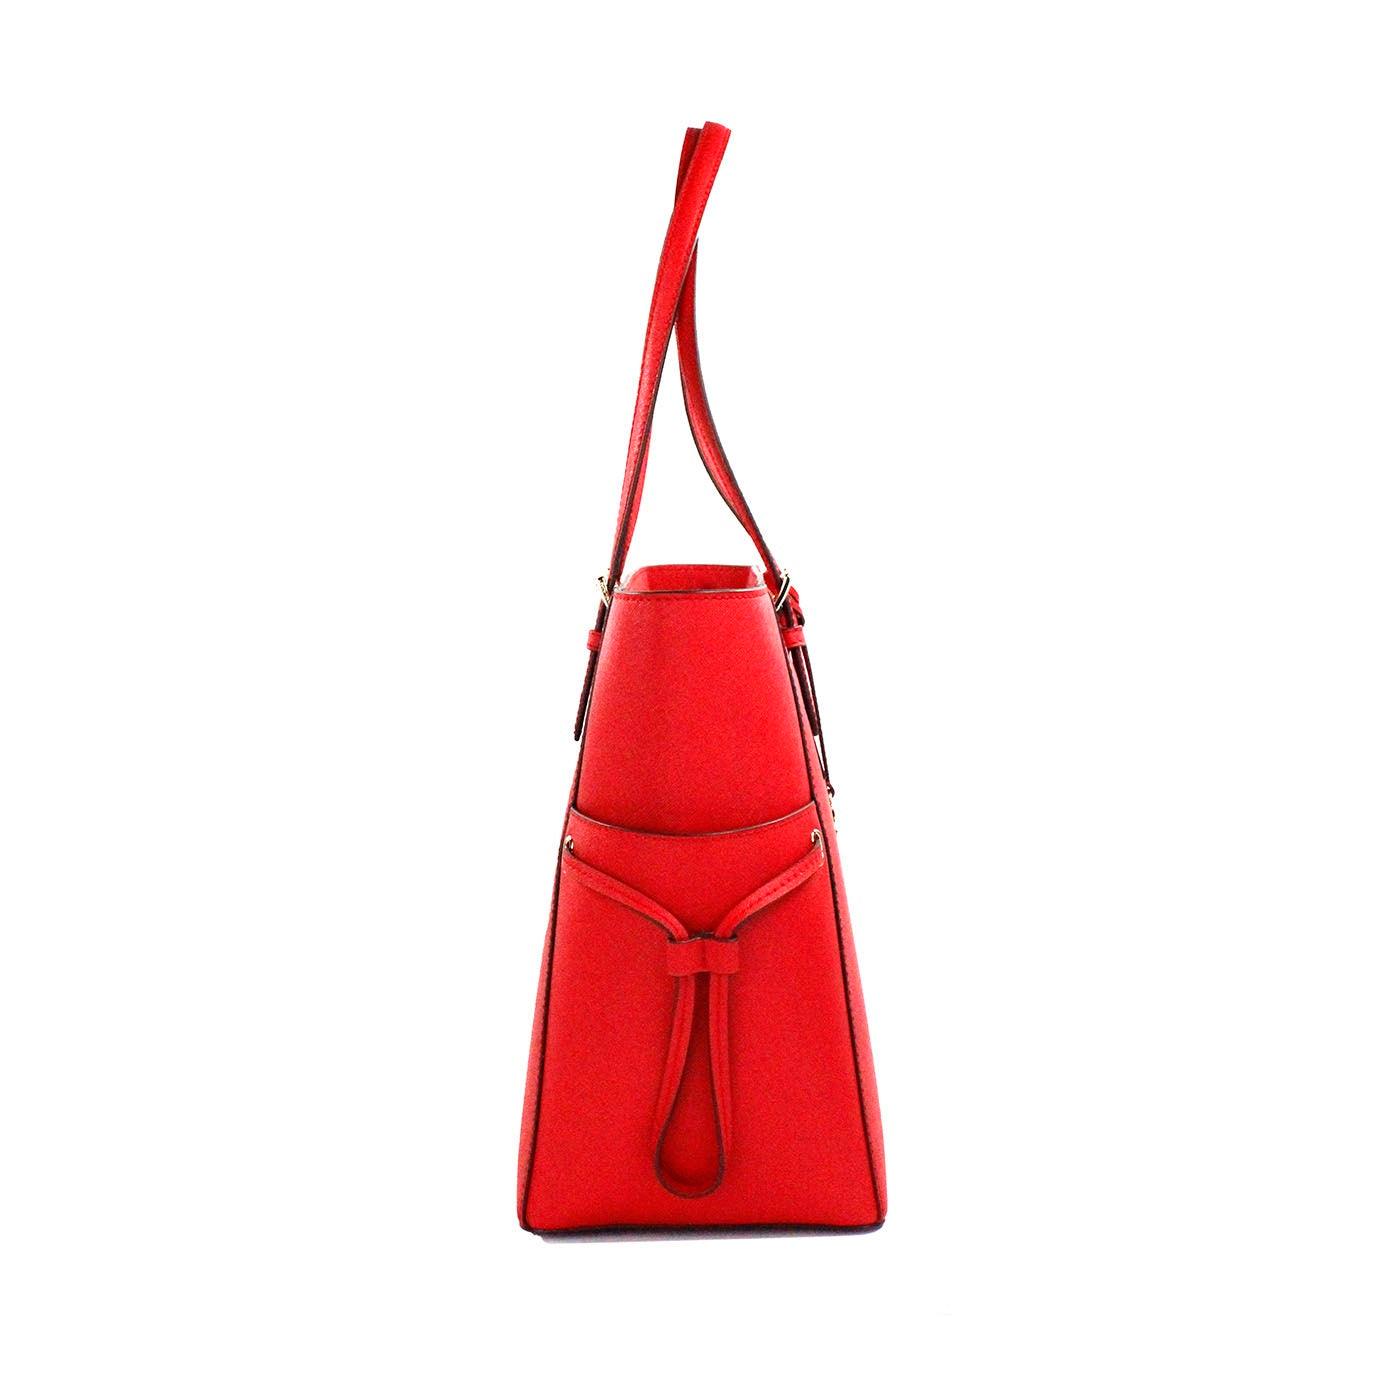 Michael Kors Gilly Large Bright Red Leather Drawstring Travel Tote Bag Purse - PER.FASHION